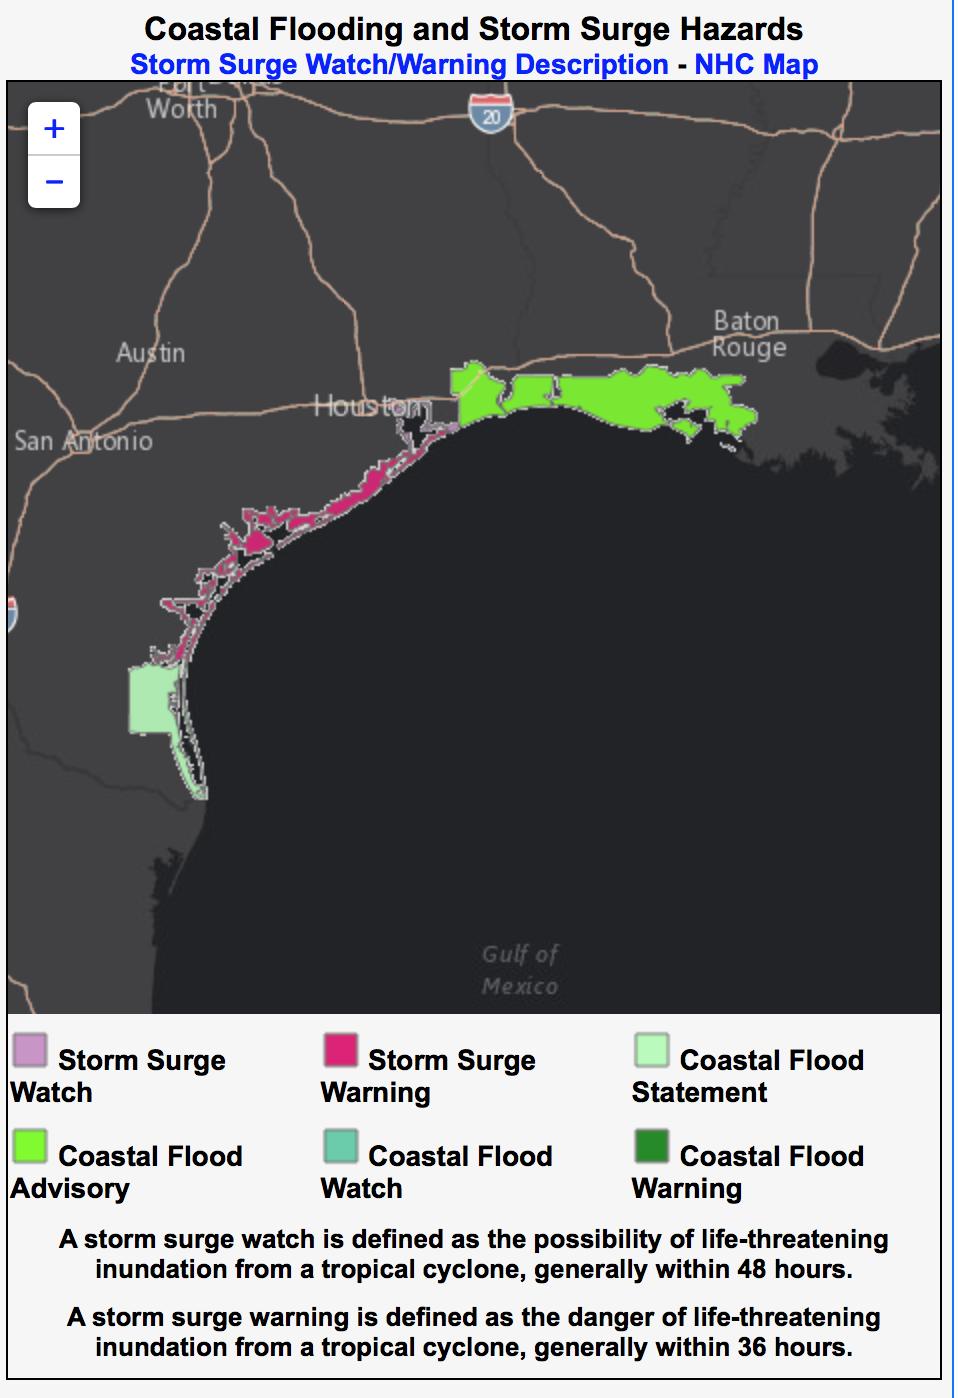 New! New for 2018: We WILL be able to issue coastal flood advisories or warnings throughout a tropical event Will be issued in situations of non-life